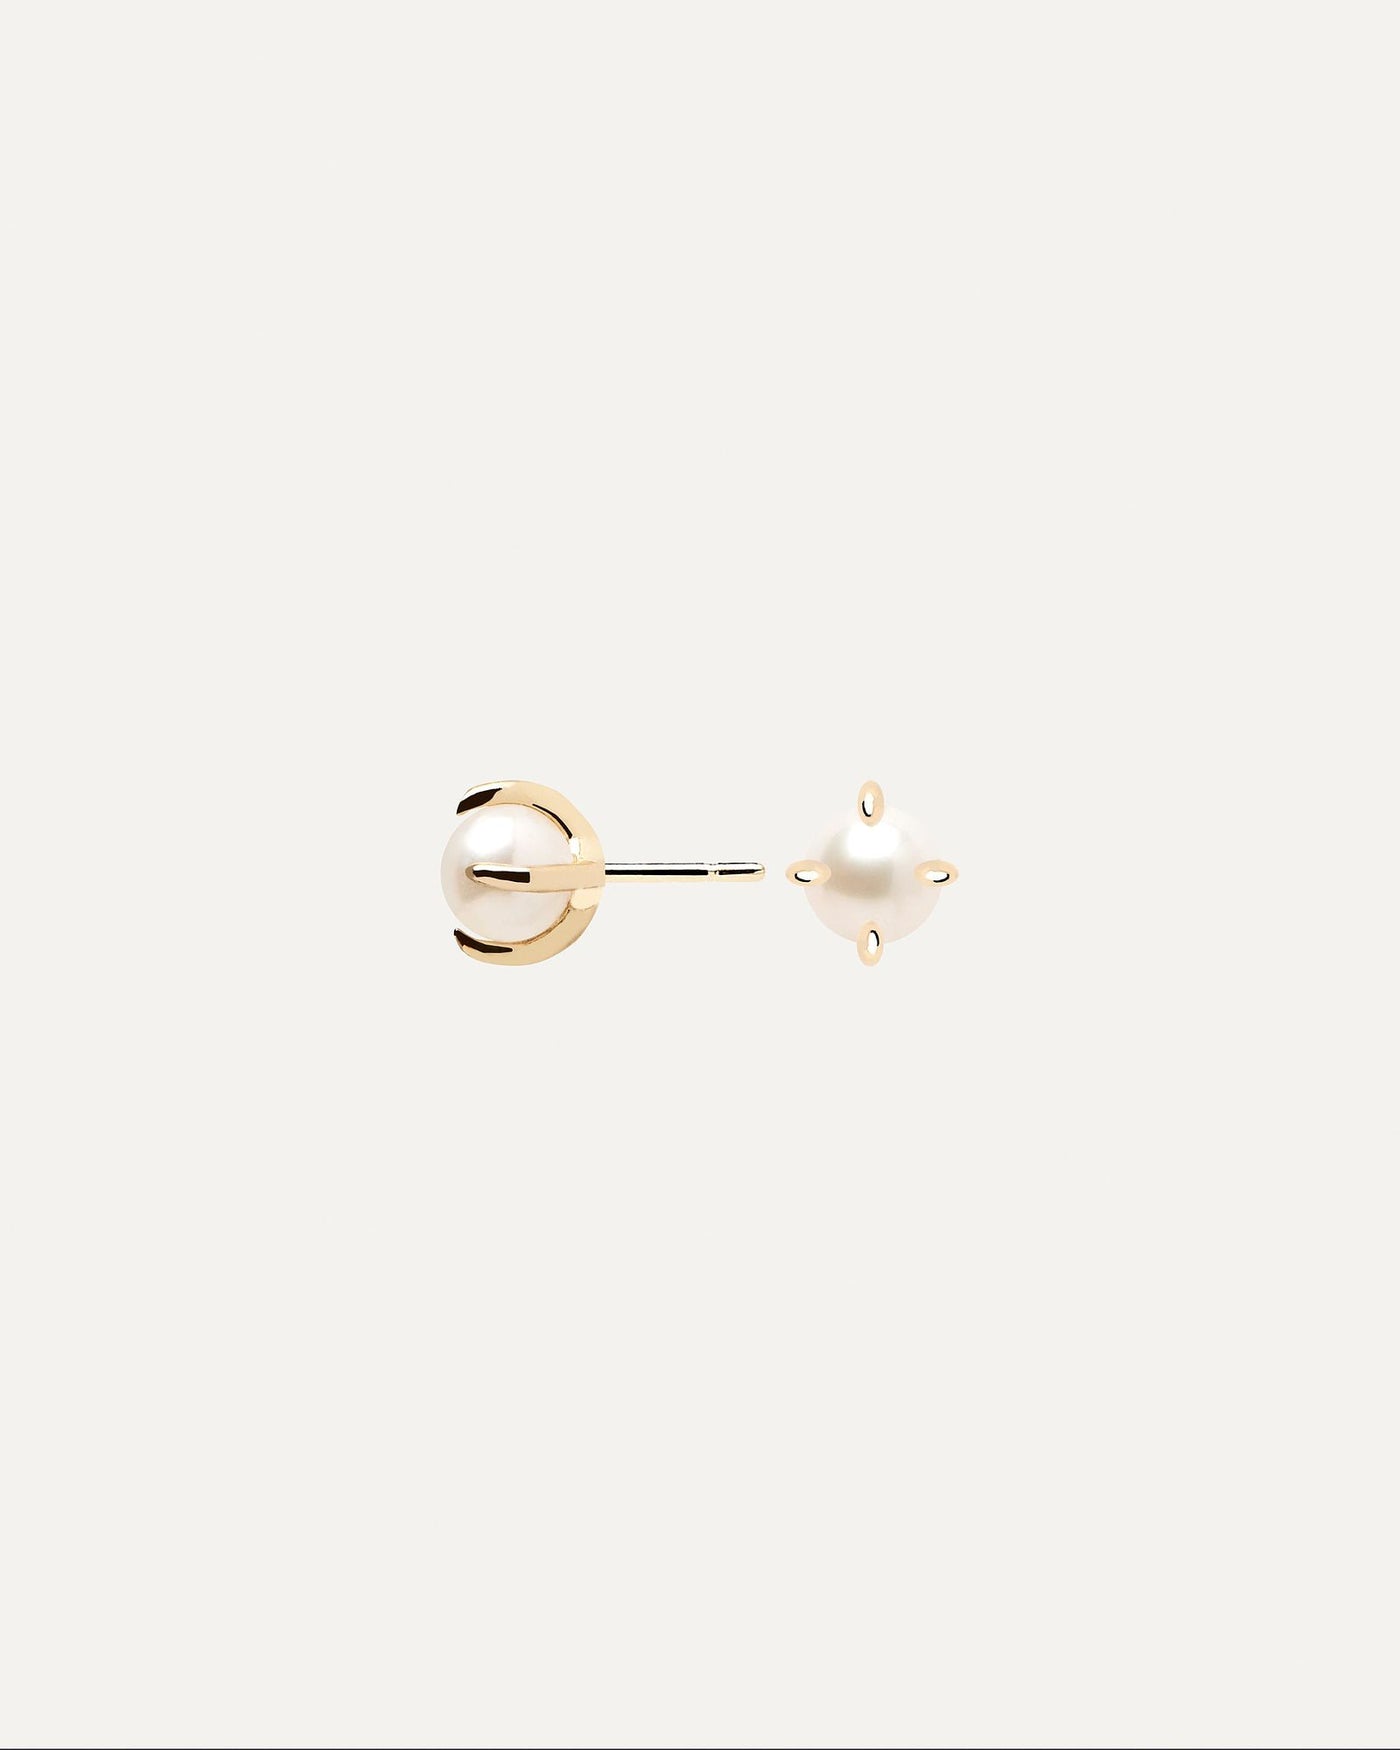 2024 Selection | Solitary Pearl Earrings. Pair of 18k gold plated single natural pearl studs set on prongs. Get the latest arrival from PDPAOLA. Place your order safely and get this Best Seller. Free Shipping.